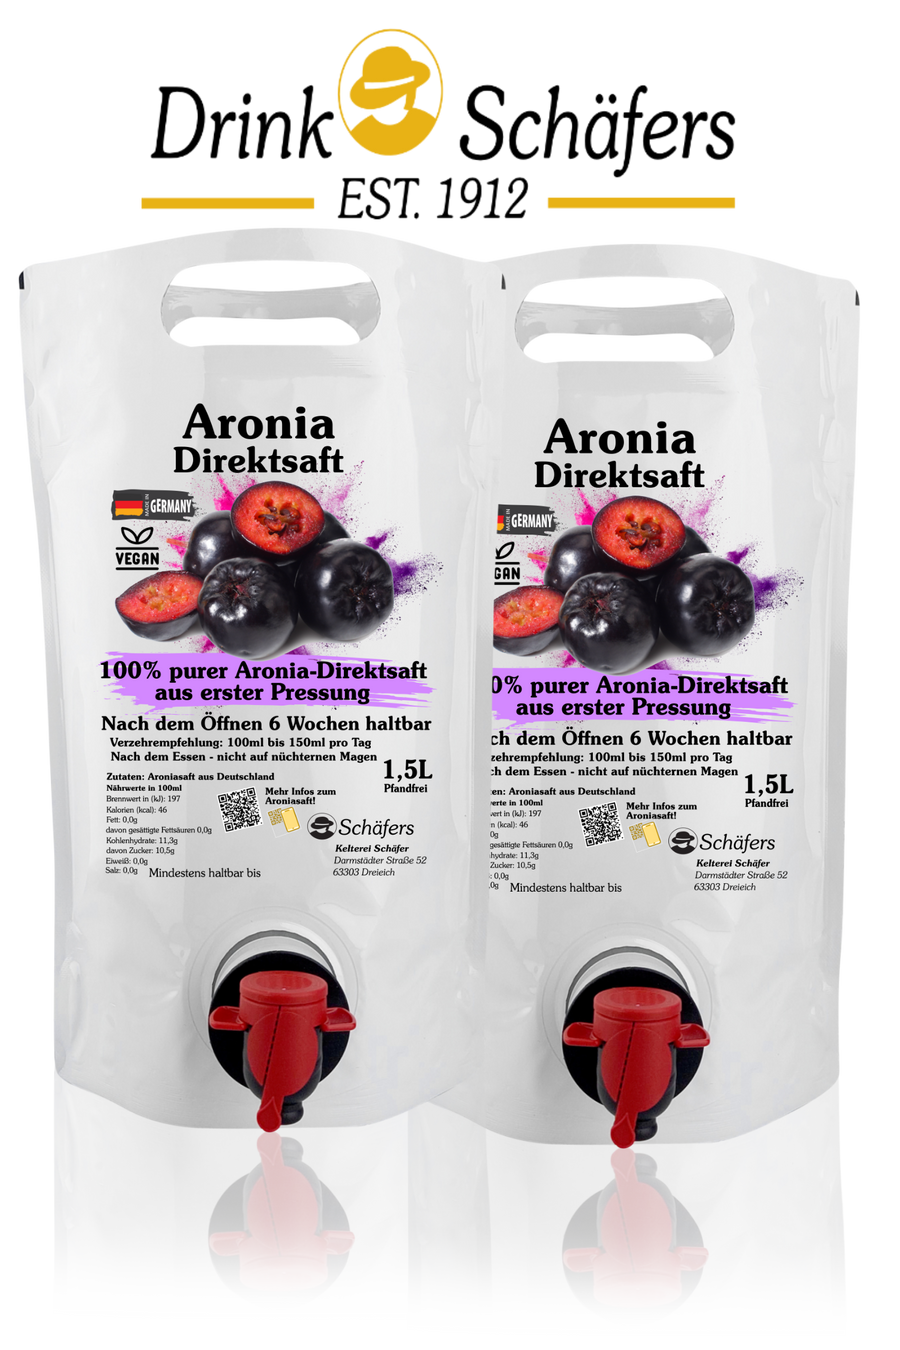 Aronisaft 2 x 1,5L SuperPouch Bag-in-Box / 3 Liter